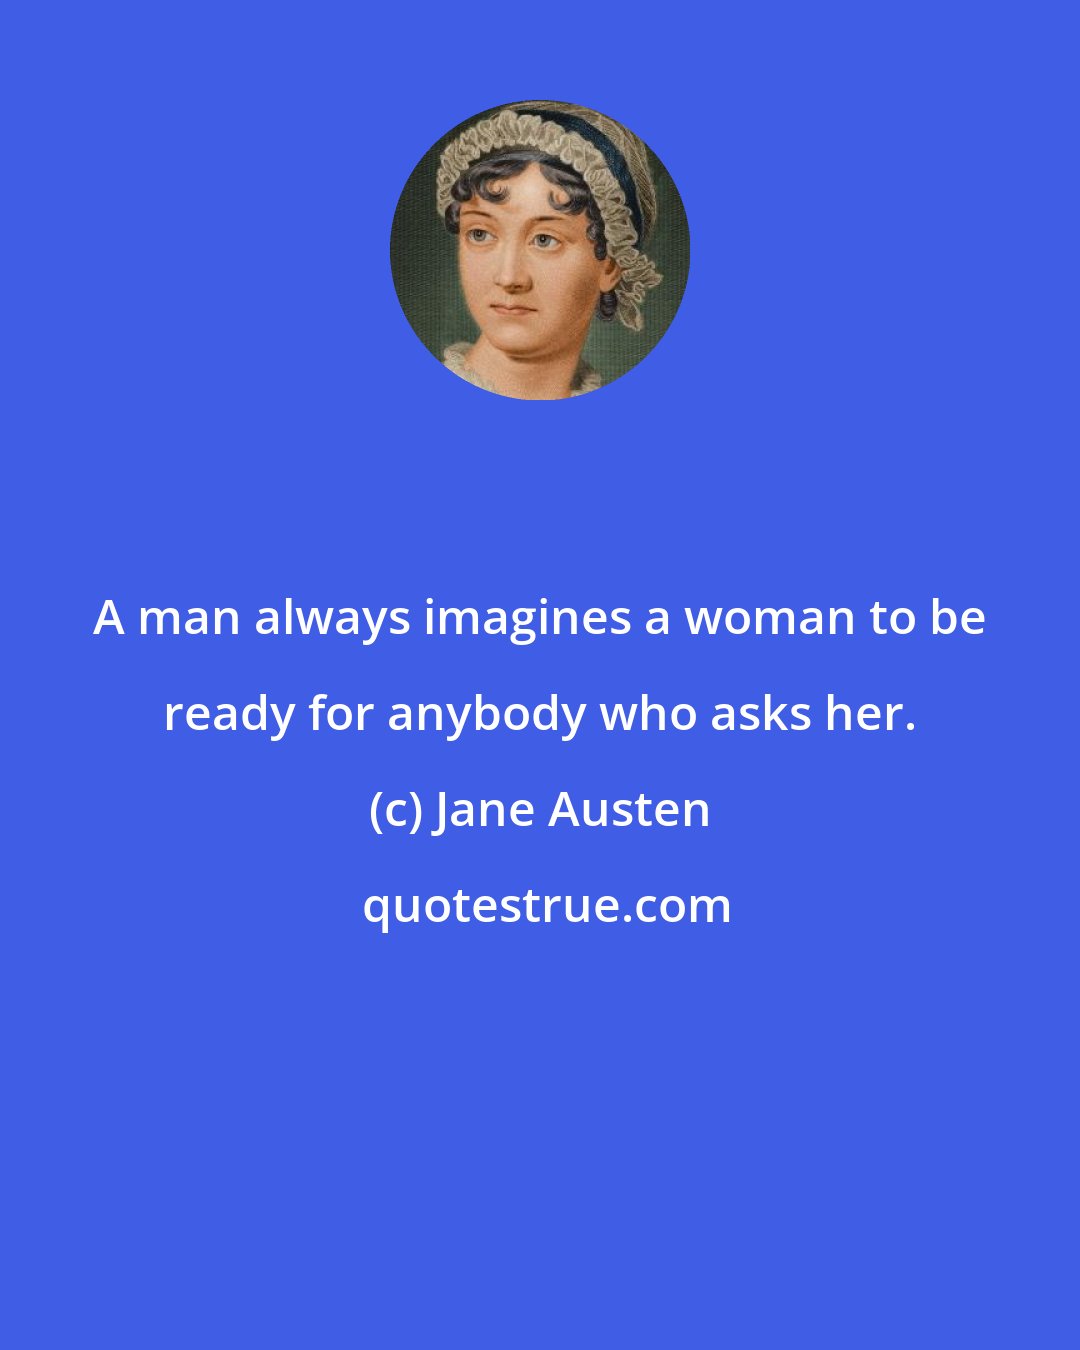 Jane Austen: A man always imagines a woman to be ready for anybody who asks her.